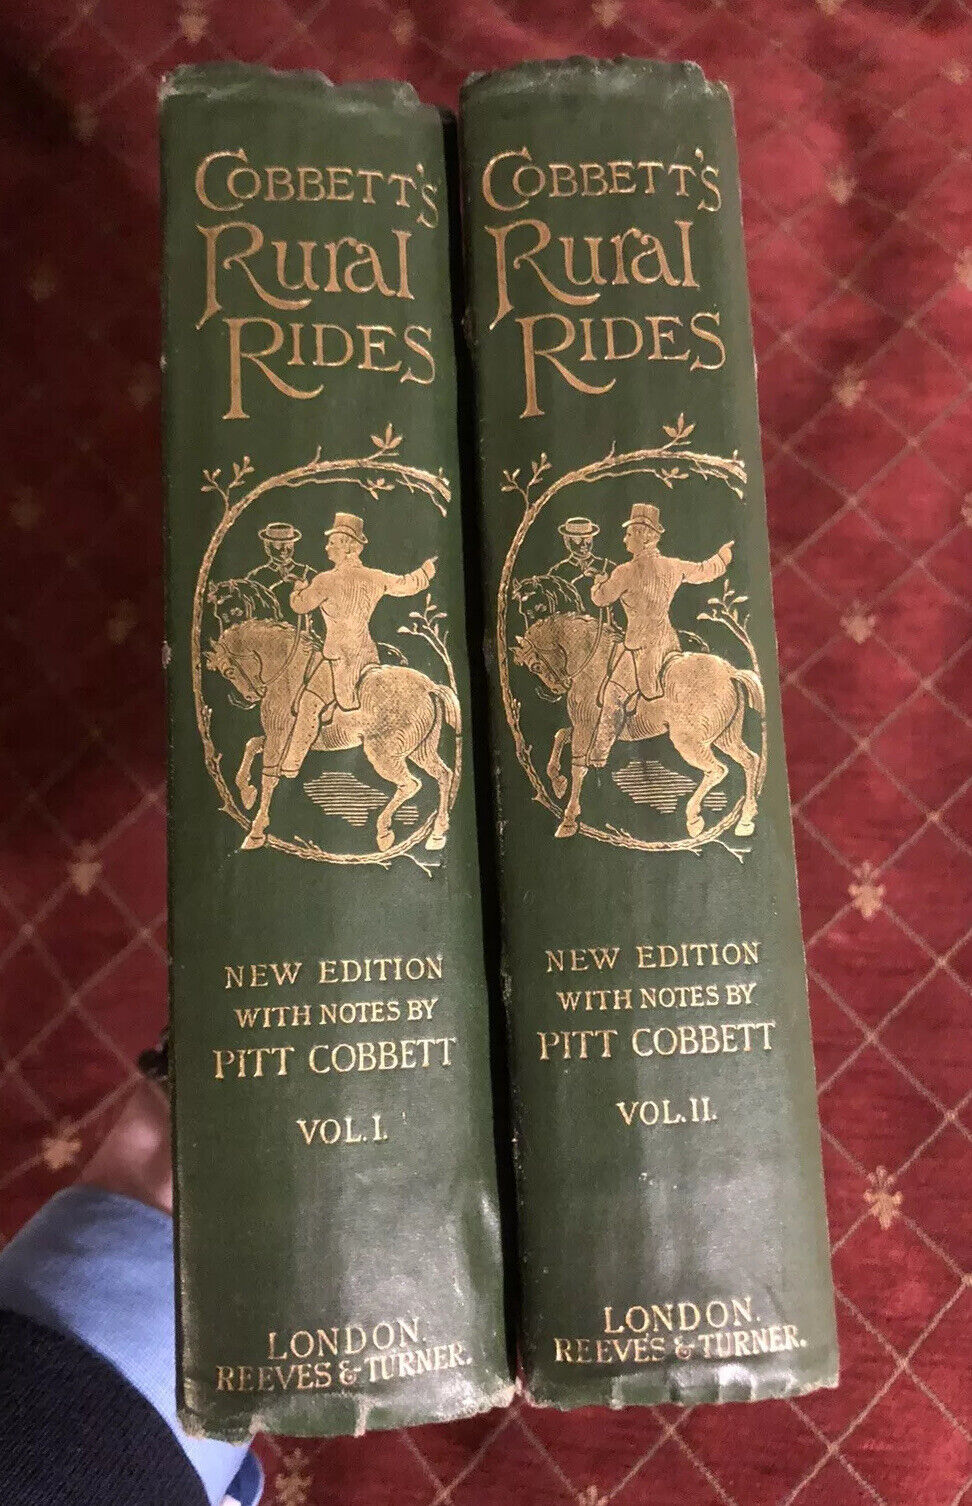 Corbett’s Rural Rides in the counties of Surrey, Kent, Sussex, Oxford 1886